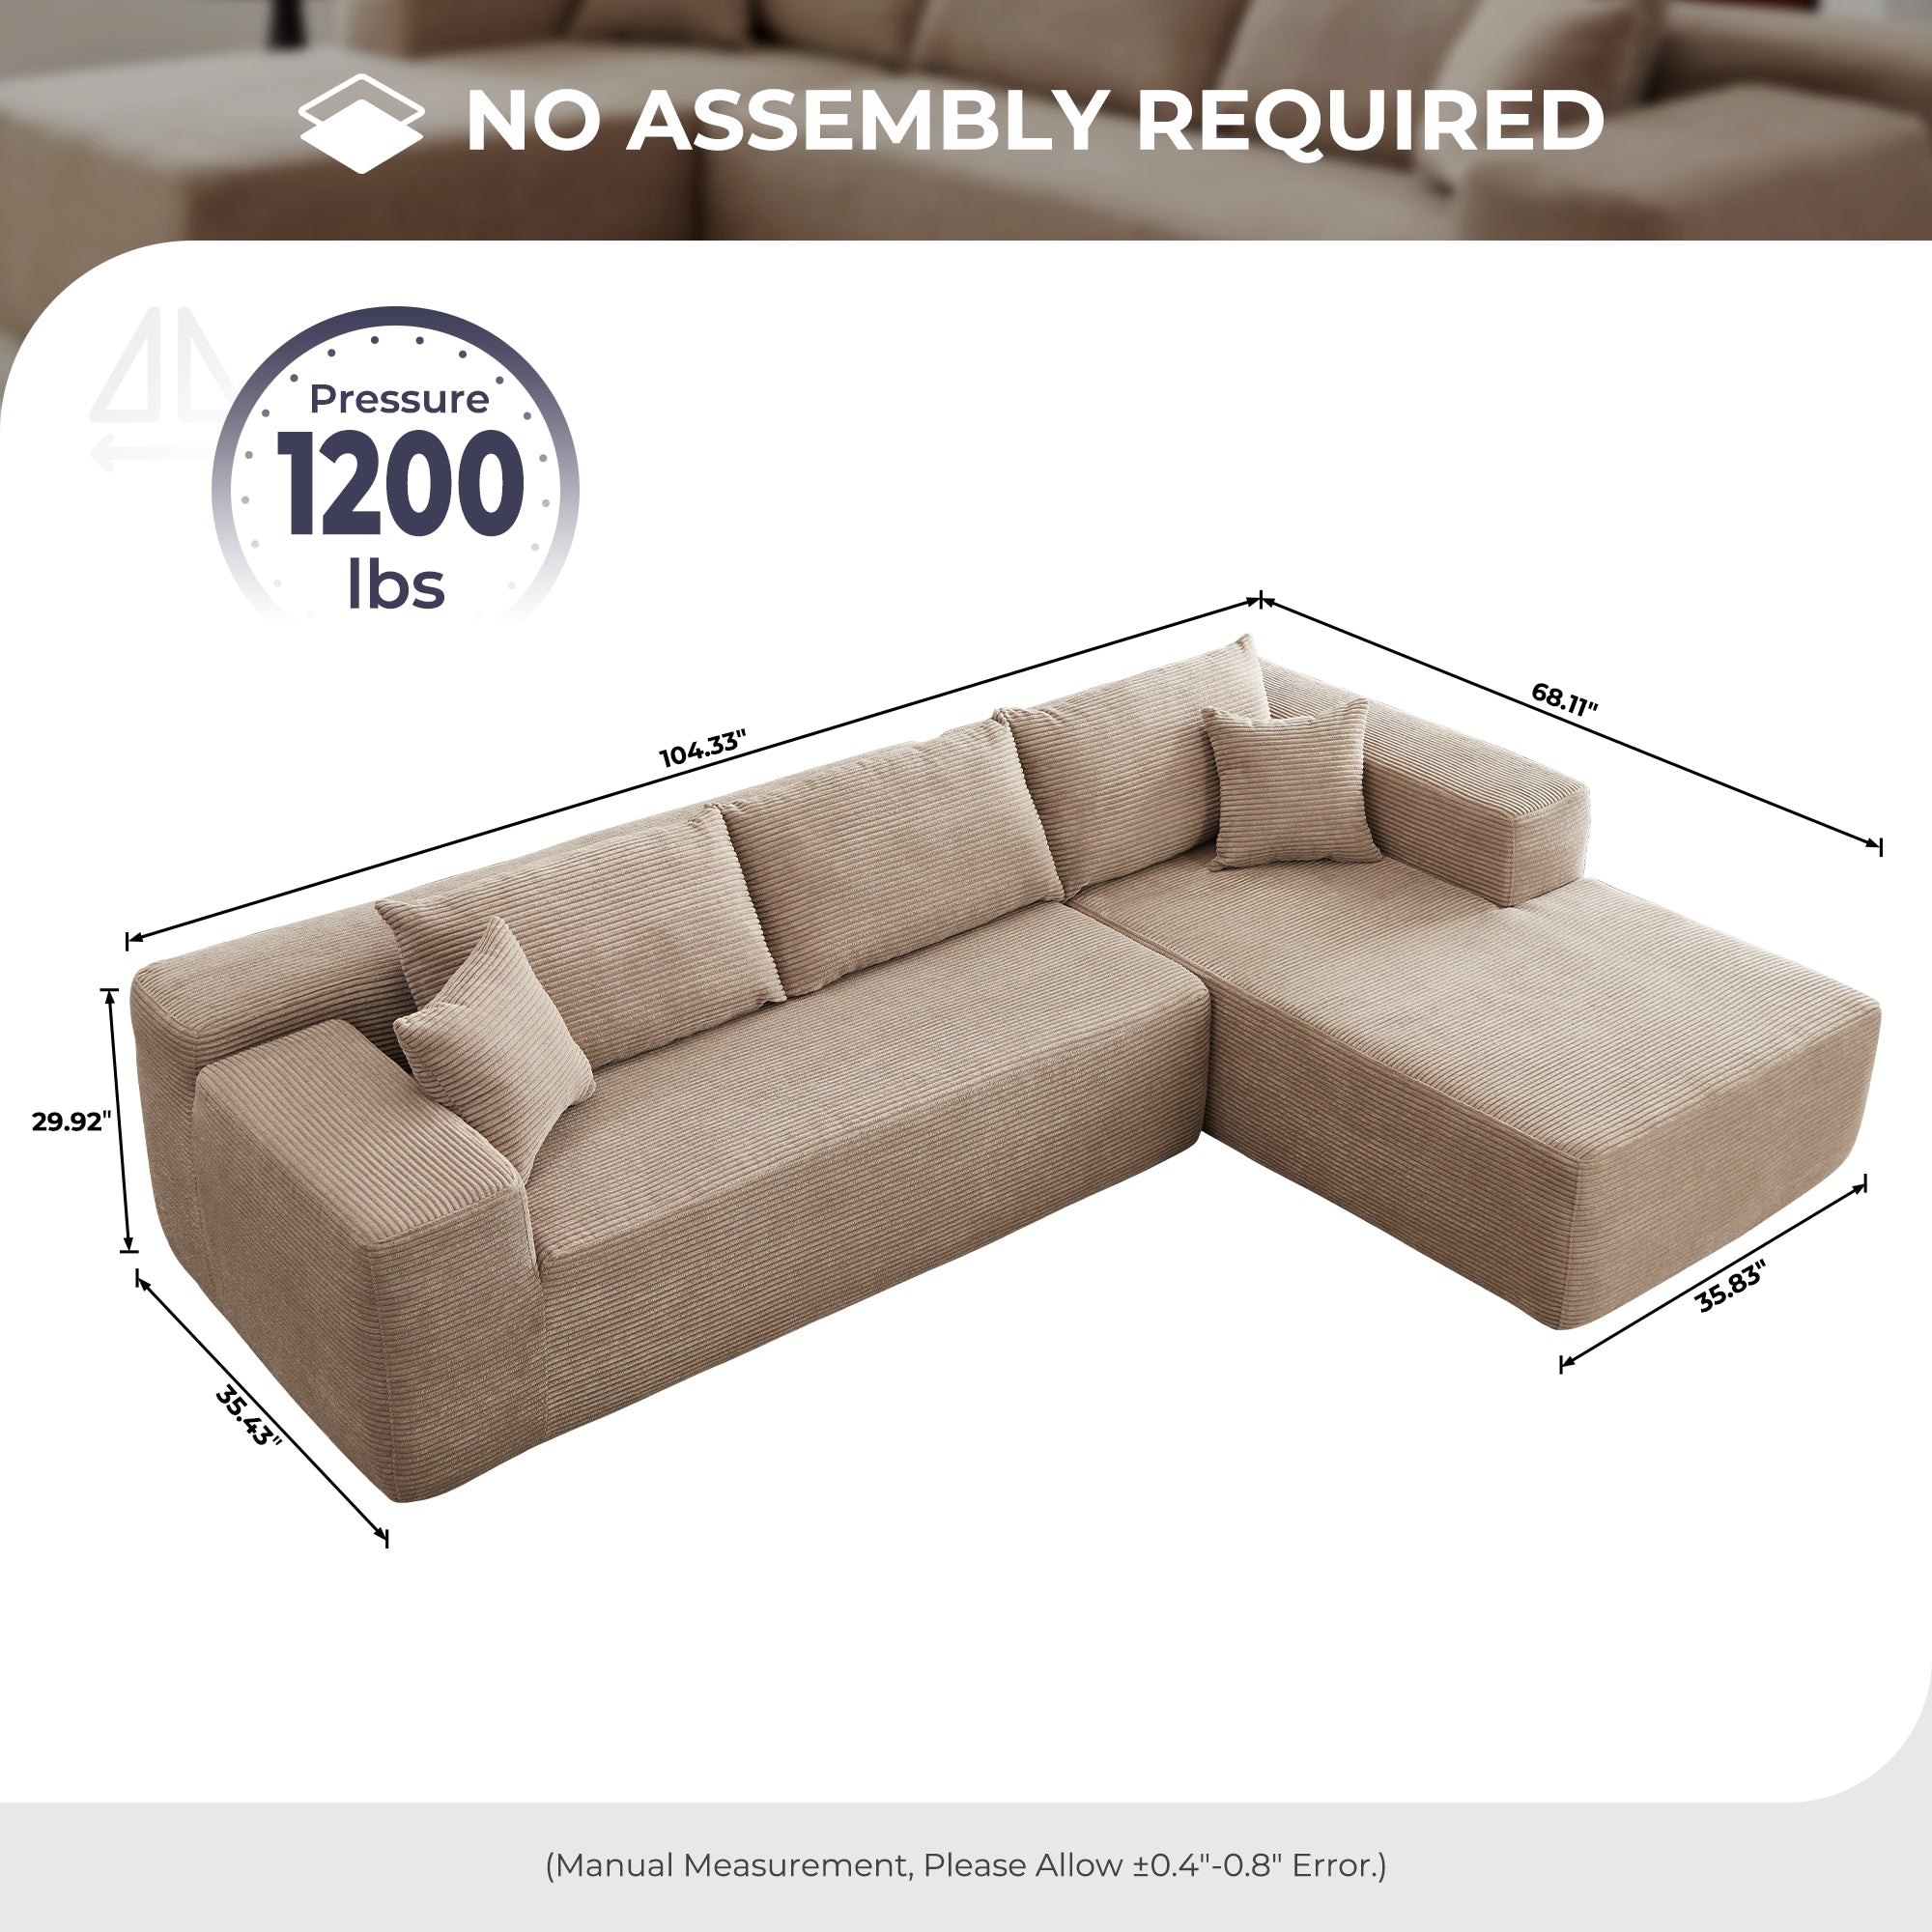 Ovios 104" L-Shape Modular Couch with Chaise,Corduroy Fabric,No Assembly Required